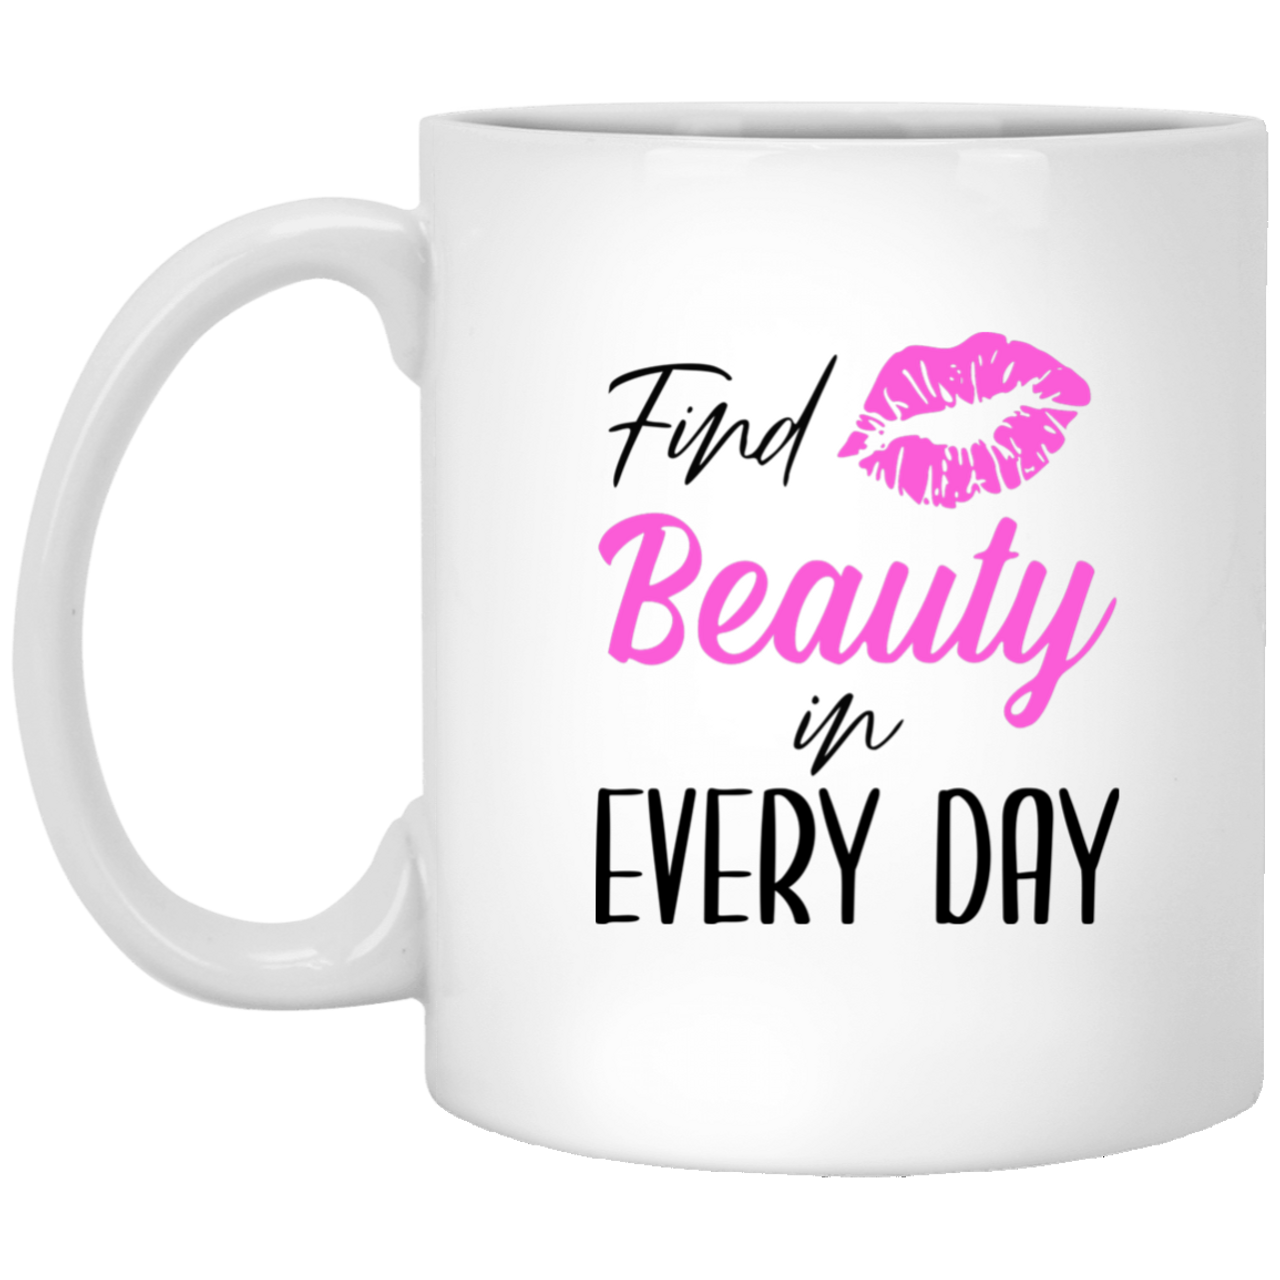 Find Beauty In Every Day XP8434 11 oz. White Mug